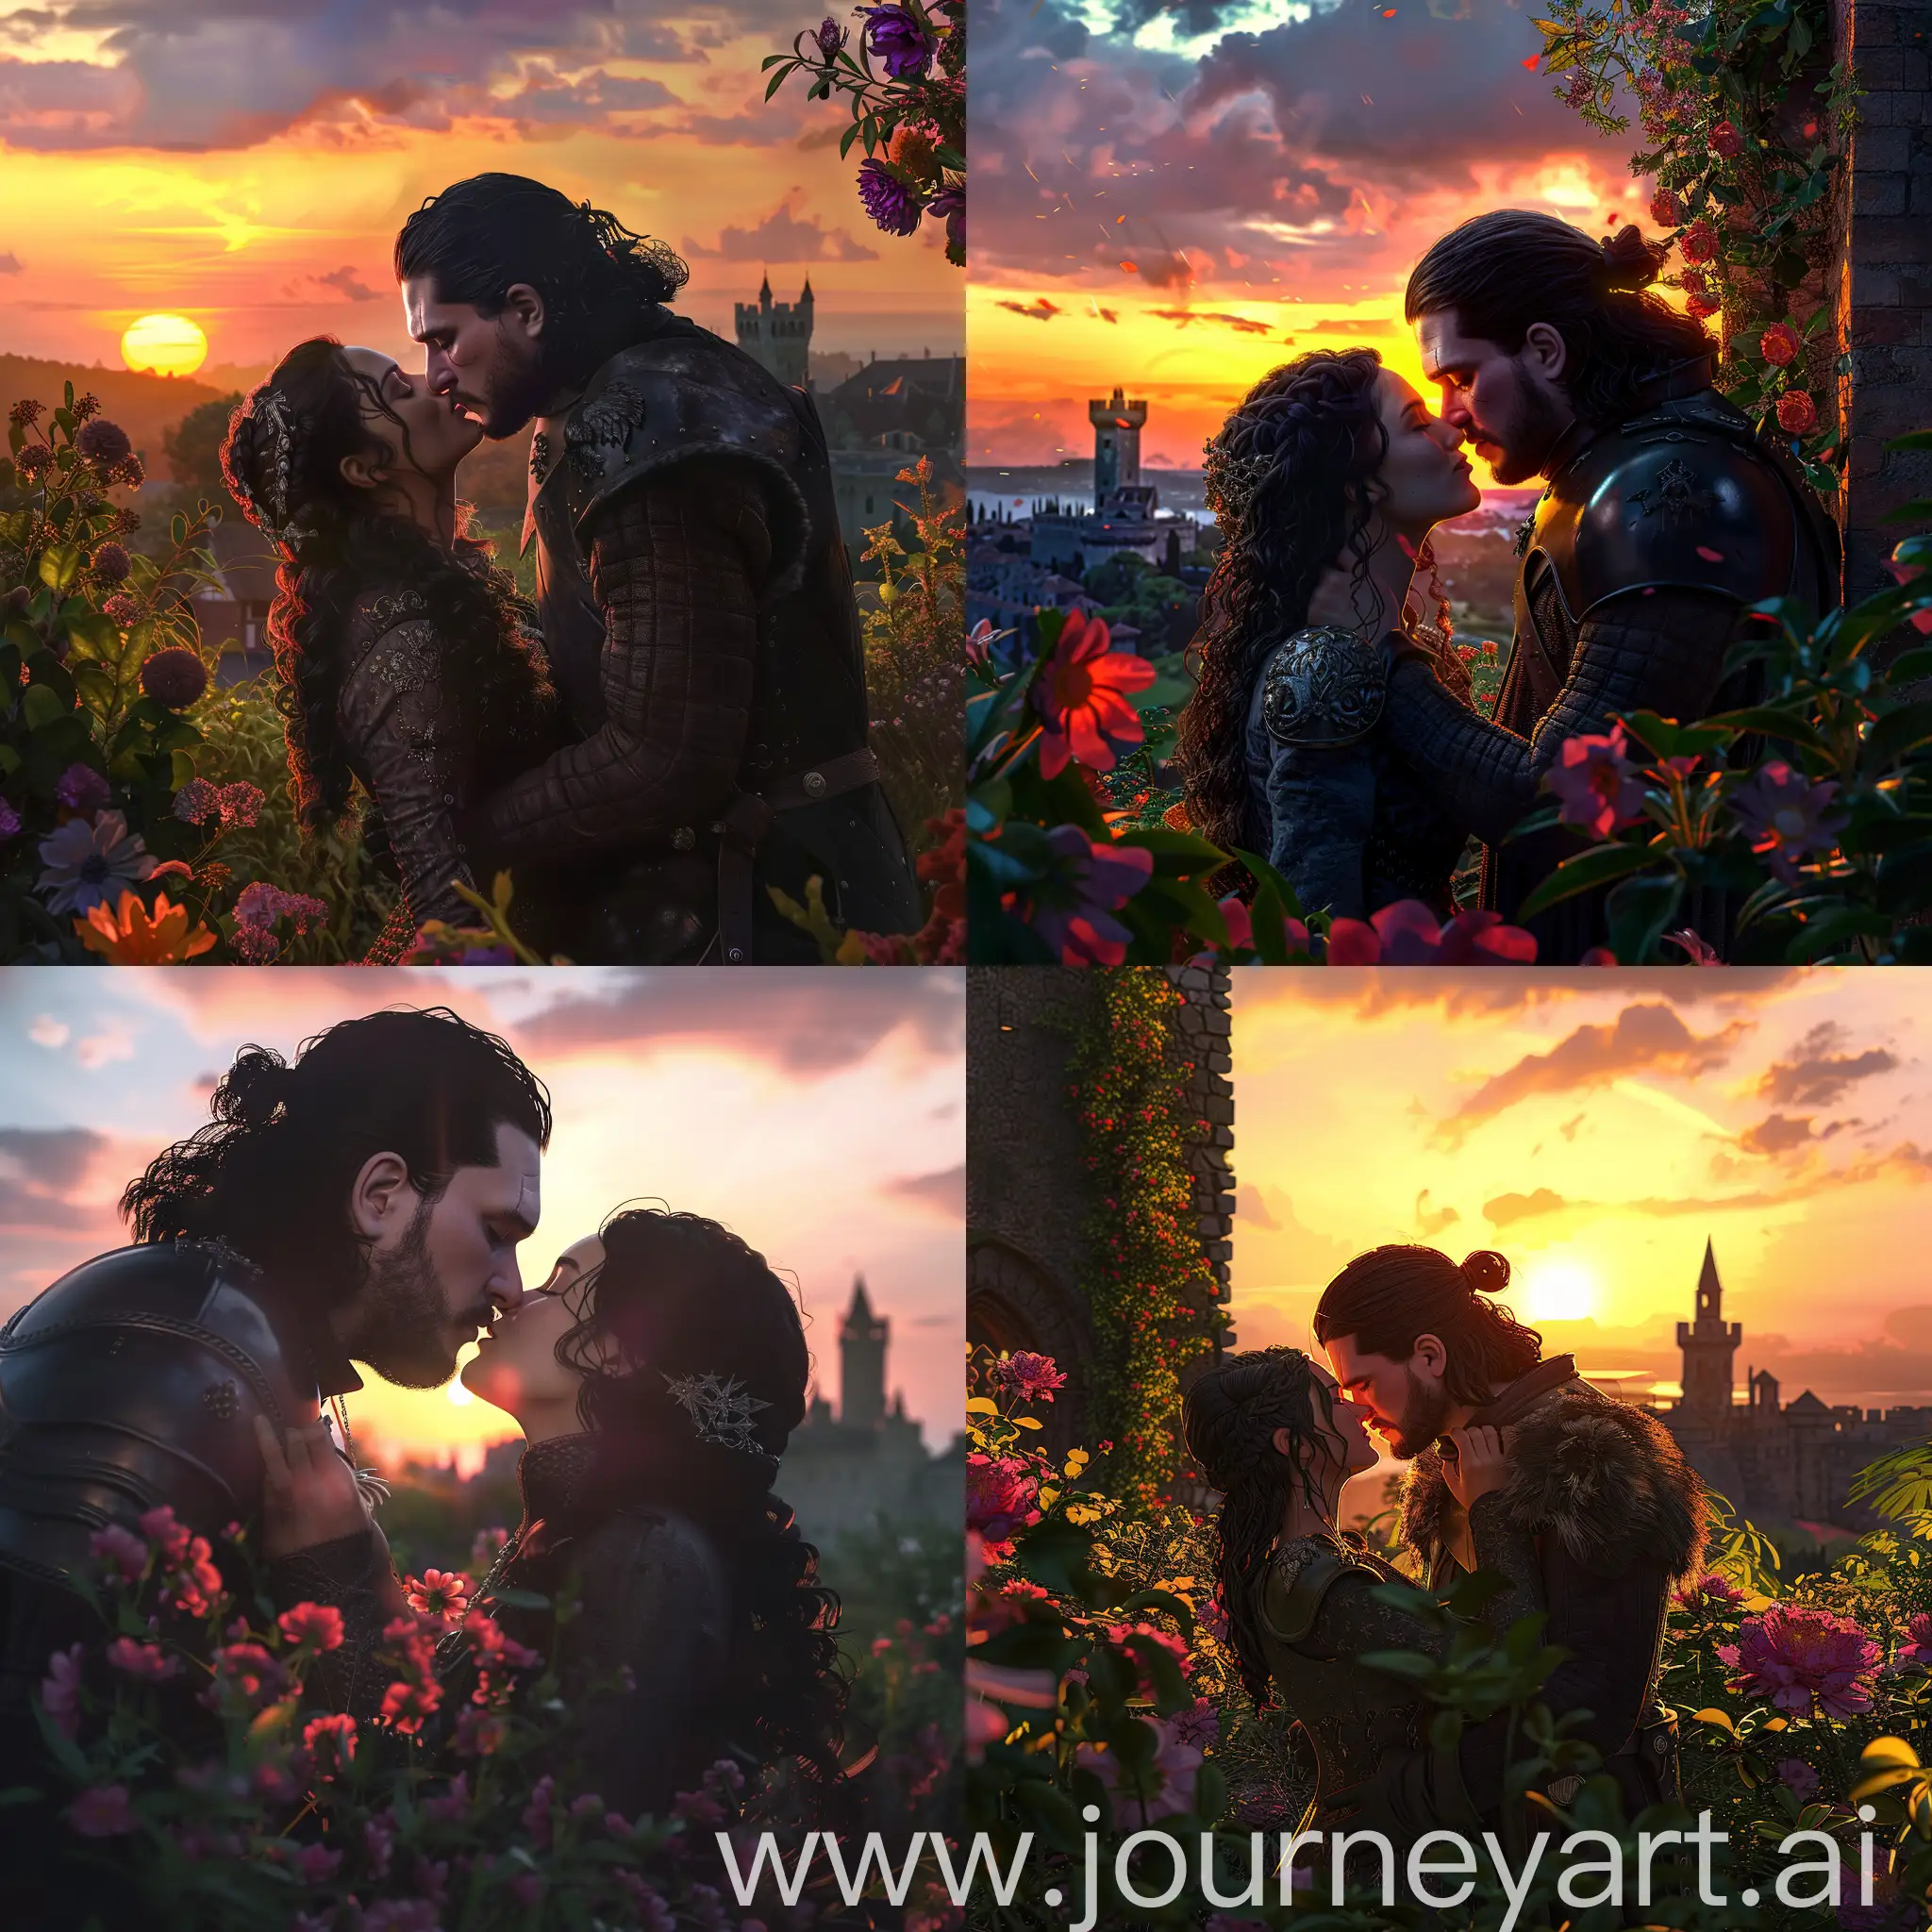 Jon Snow in Toussaint, Beauclair castle, Jon Snow kiss Anna Henrietta, flowers, sunset,  the witcher 3 blood and wine, game of thrones, photorealism, 4K, 3D 